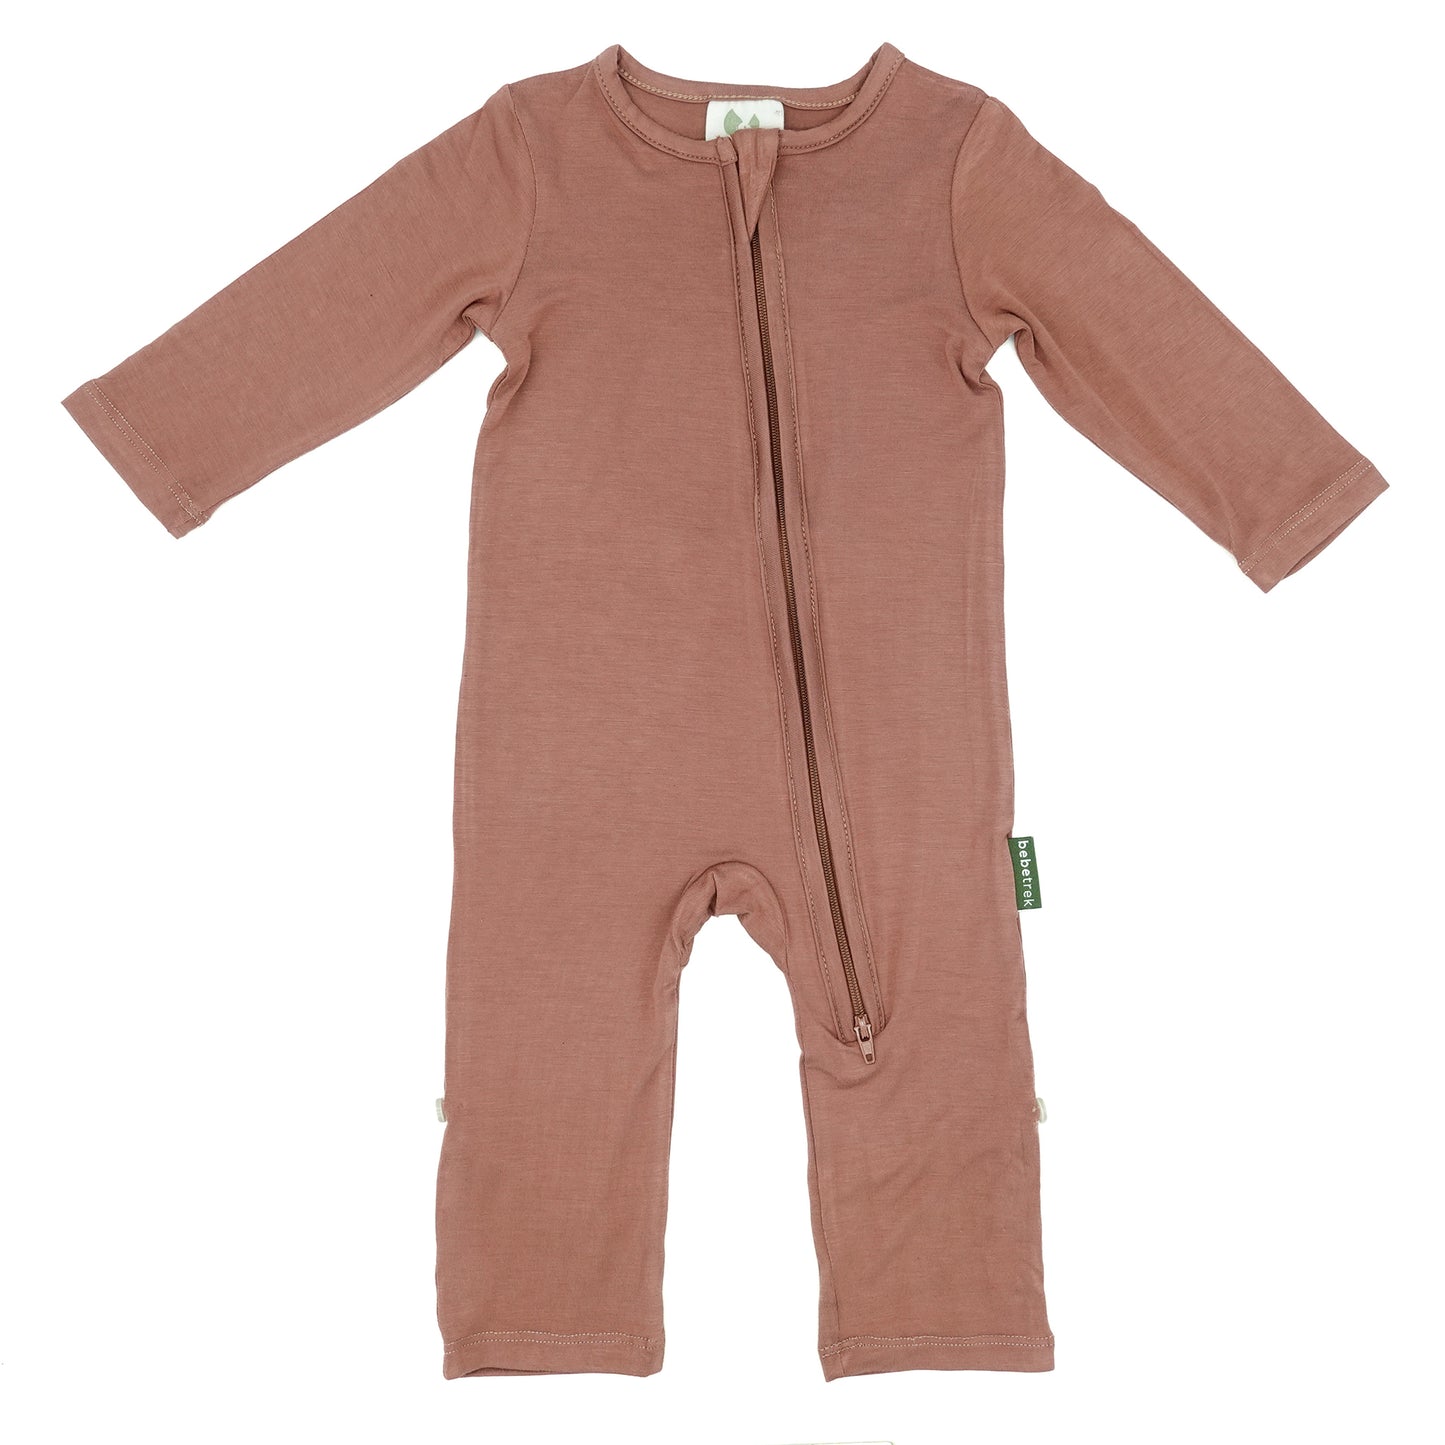 UPF 50+ baby sunsuit for outdoor adventures